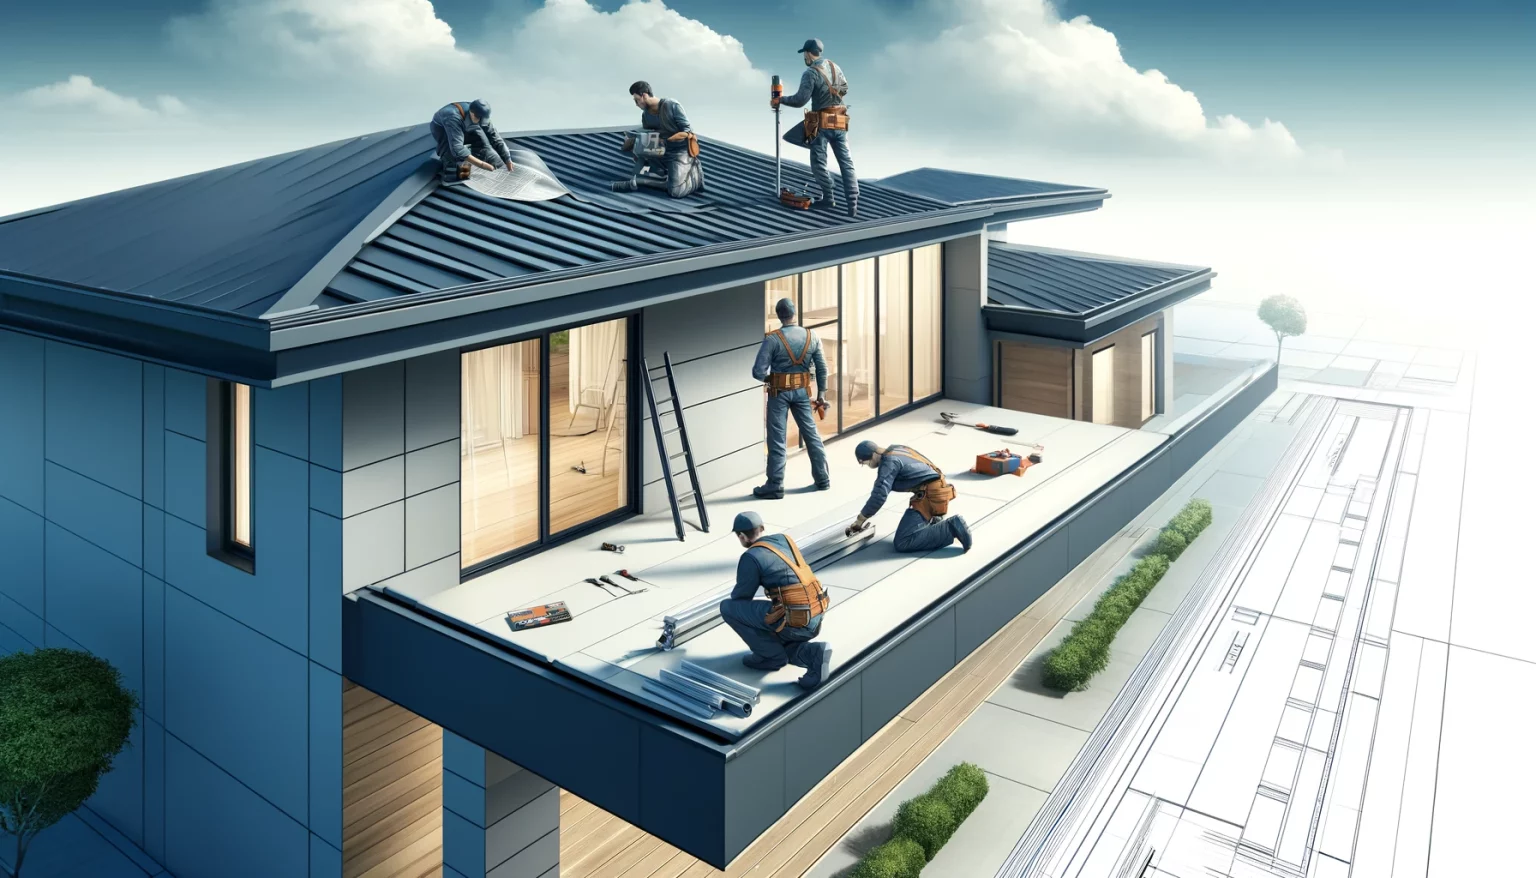 Roof repair specialists efficiently working on a modern house.